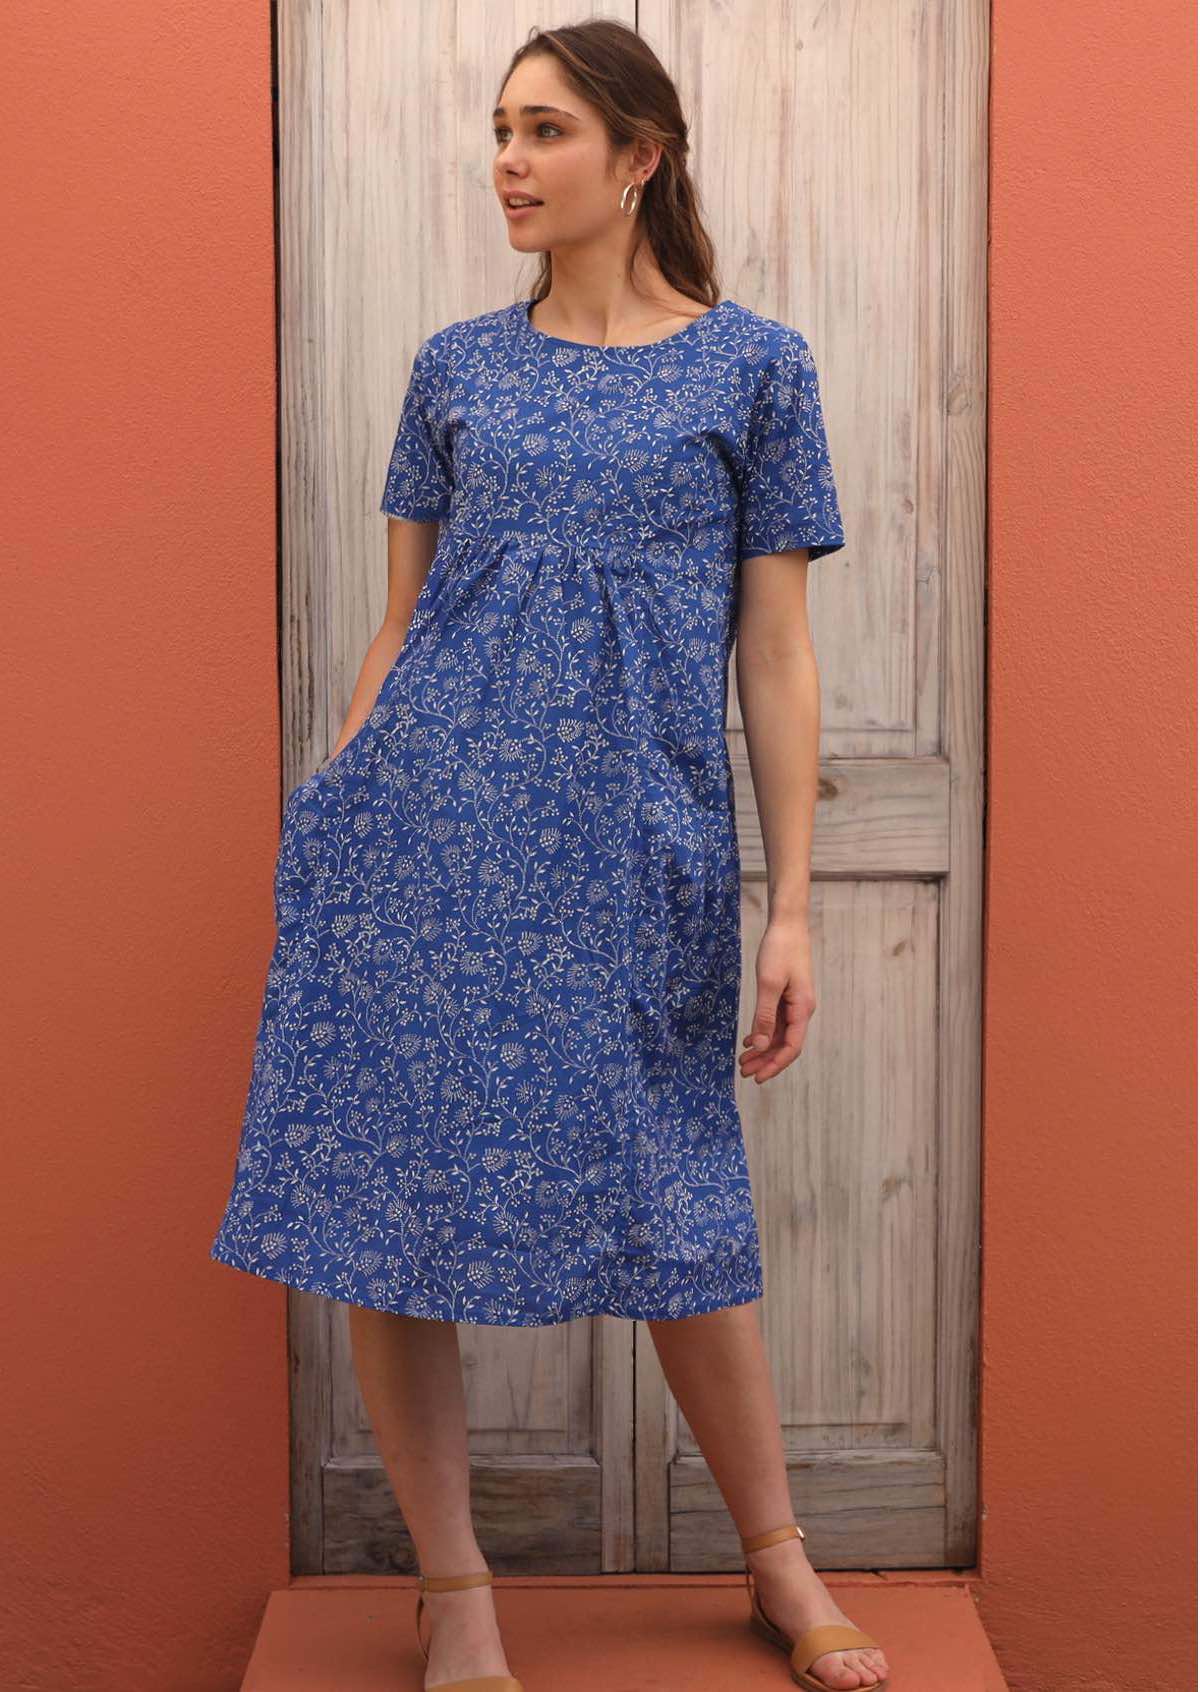 Model showcases blue base dress with a delicate white floral pattern. 